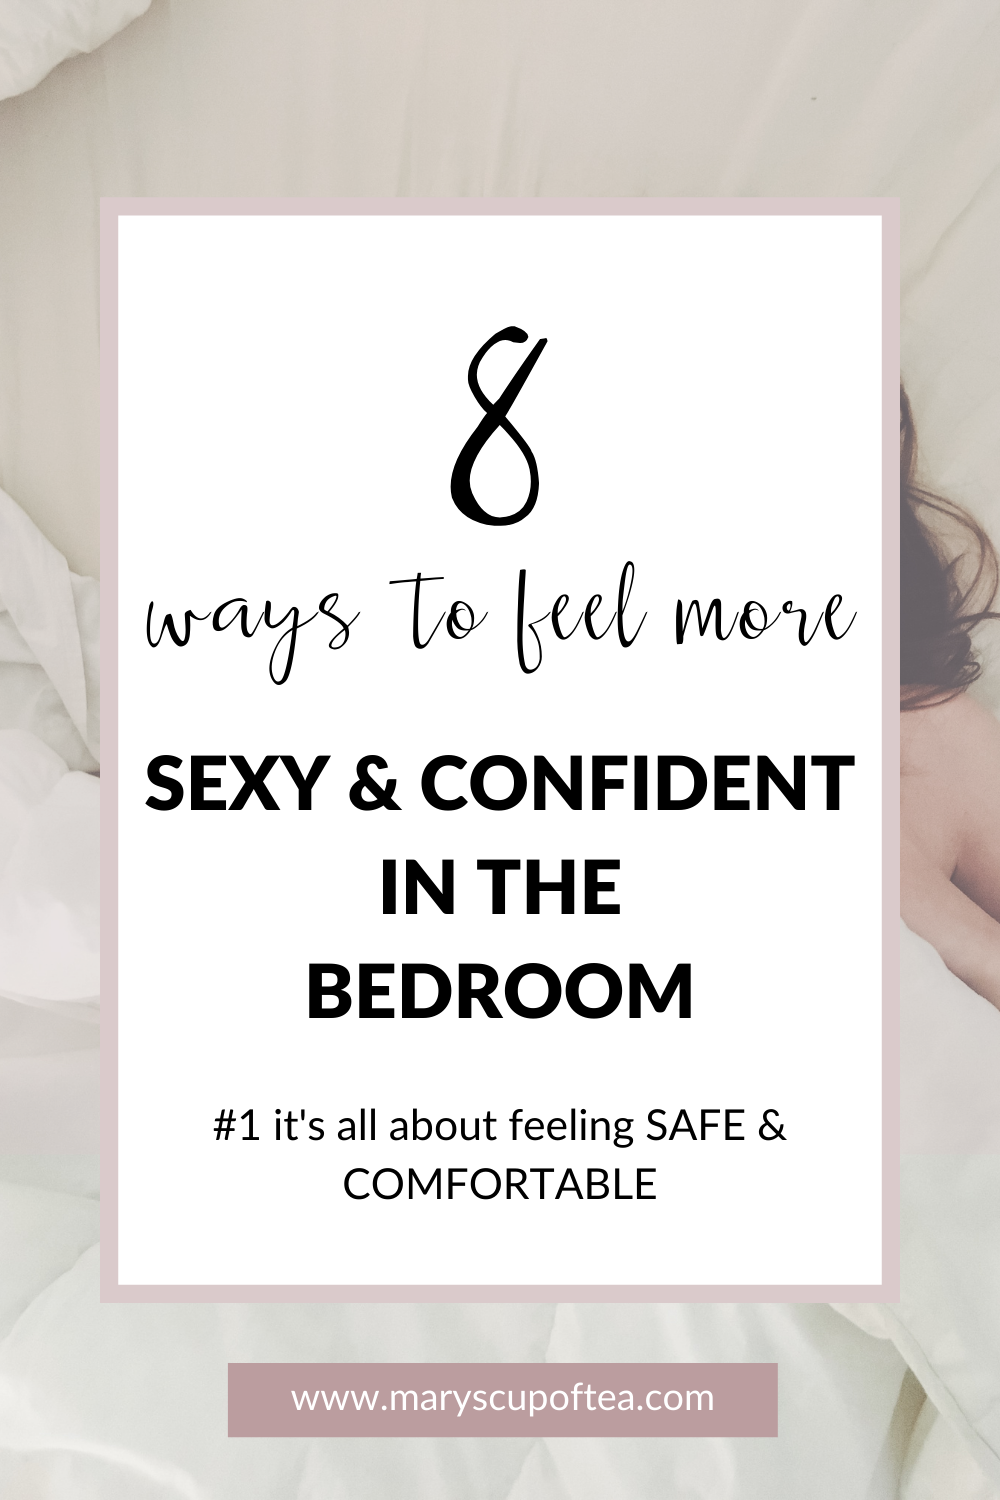 Want to feel sexy and confident in the bedroom? Here's how - #maryscupoftea #selflove #bodyconfidence